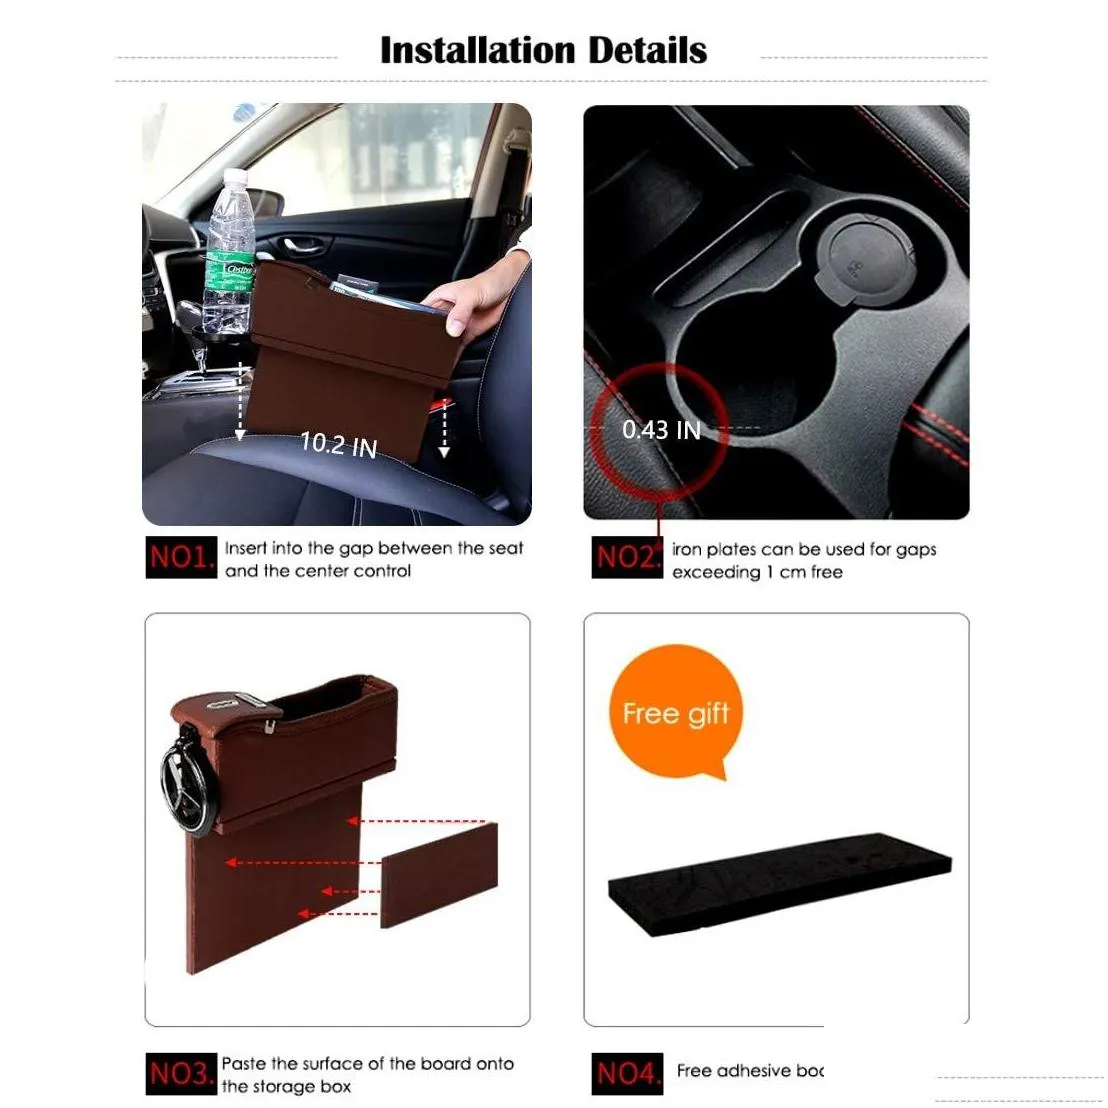 Maodaner Universal Car Seat Gap Filler Premium PU Leather Side Pocket Organizer, Seat Crevice Storage Box with Cup Holder for Smartphone Coin Wallet